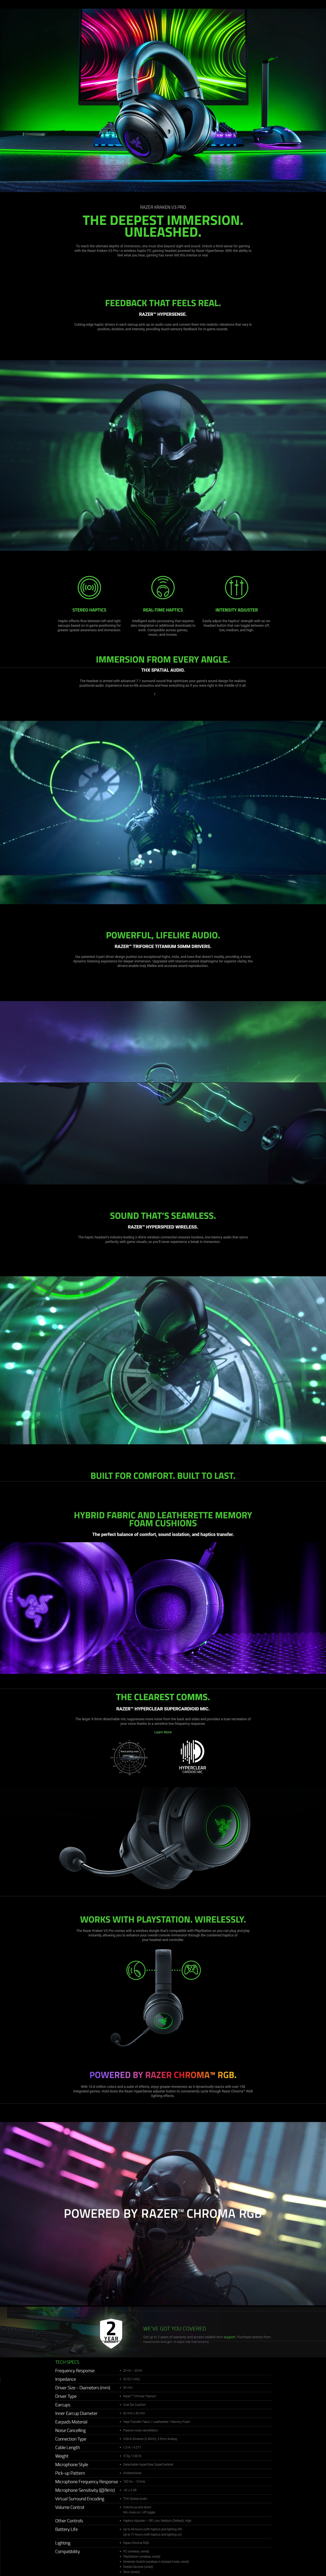 A large marketing image providing additional information about the product Razer Kraken V3 Pro Wireless Gaming Headset with Razer HyperSense - Additional alt info not provided